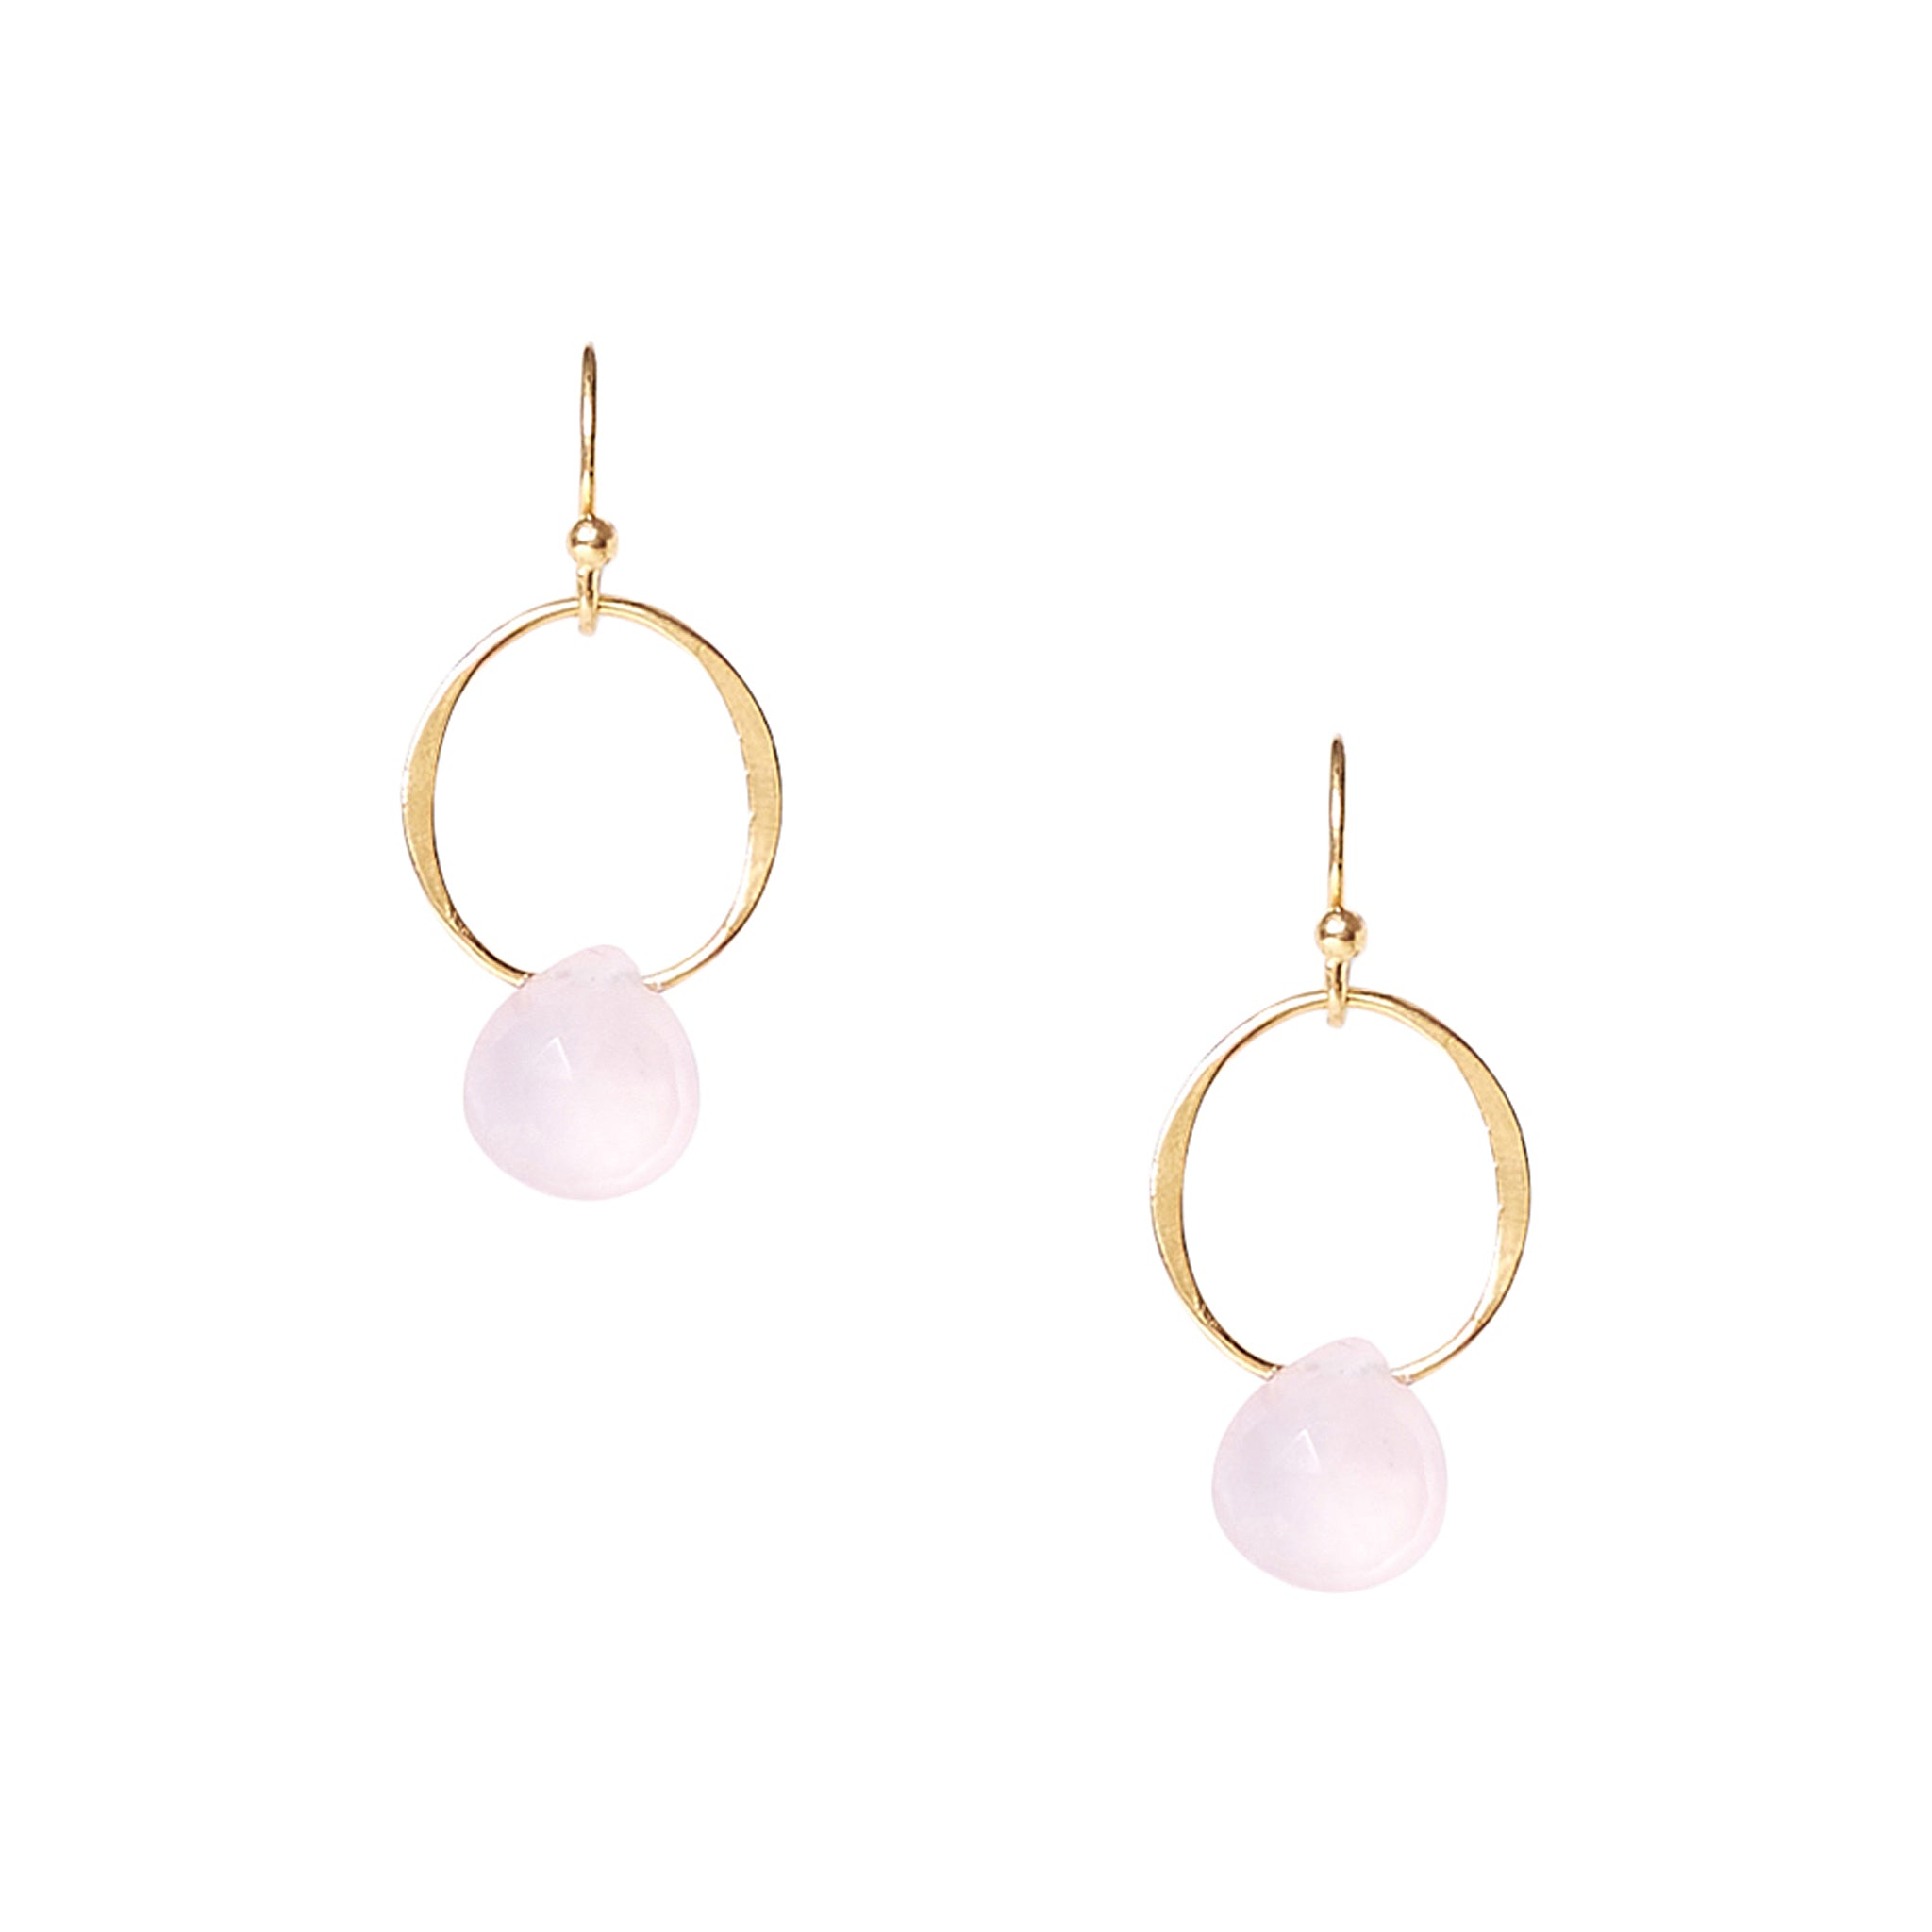 Chan Luu Front Facing Small Hoop Earrings in Rose Quartz Briolette and Gold